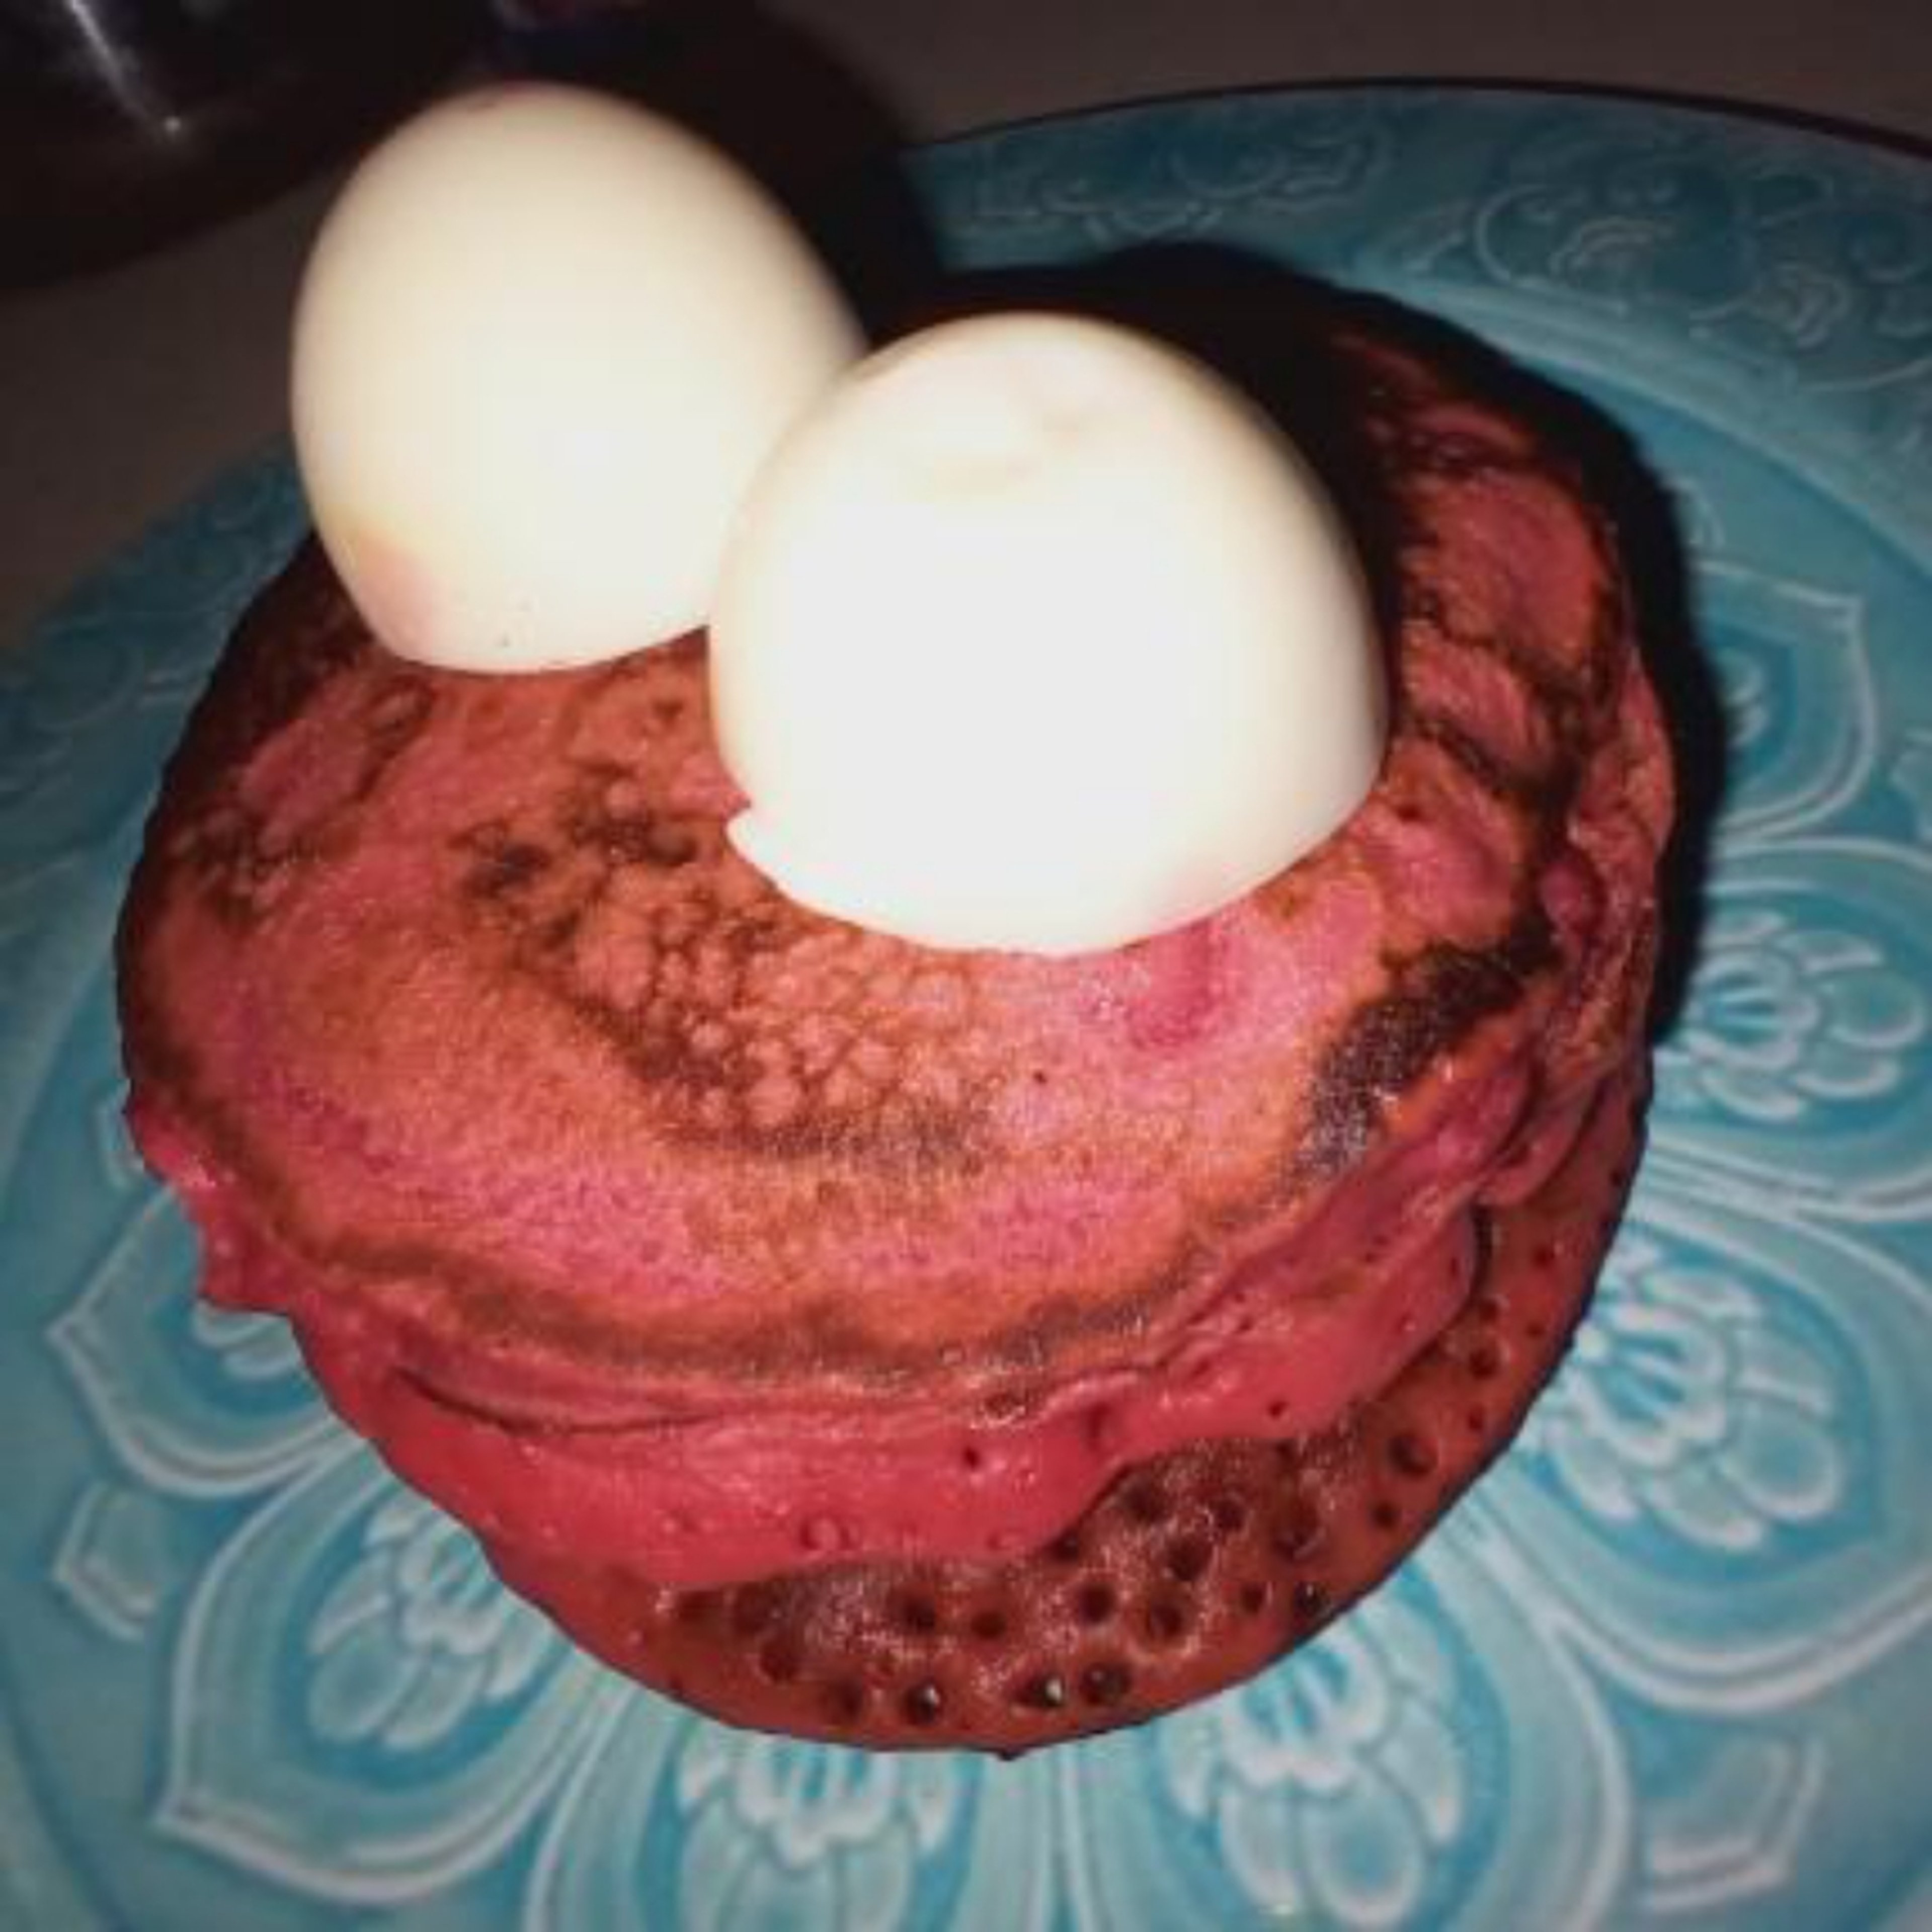 Red rose pancakes with boiled egg